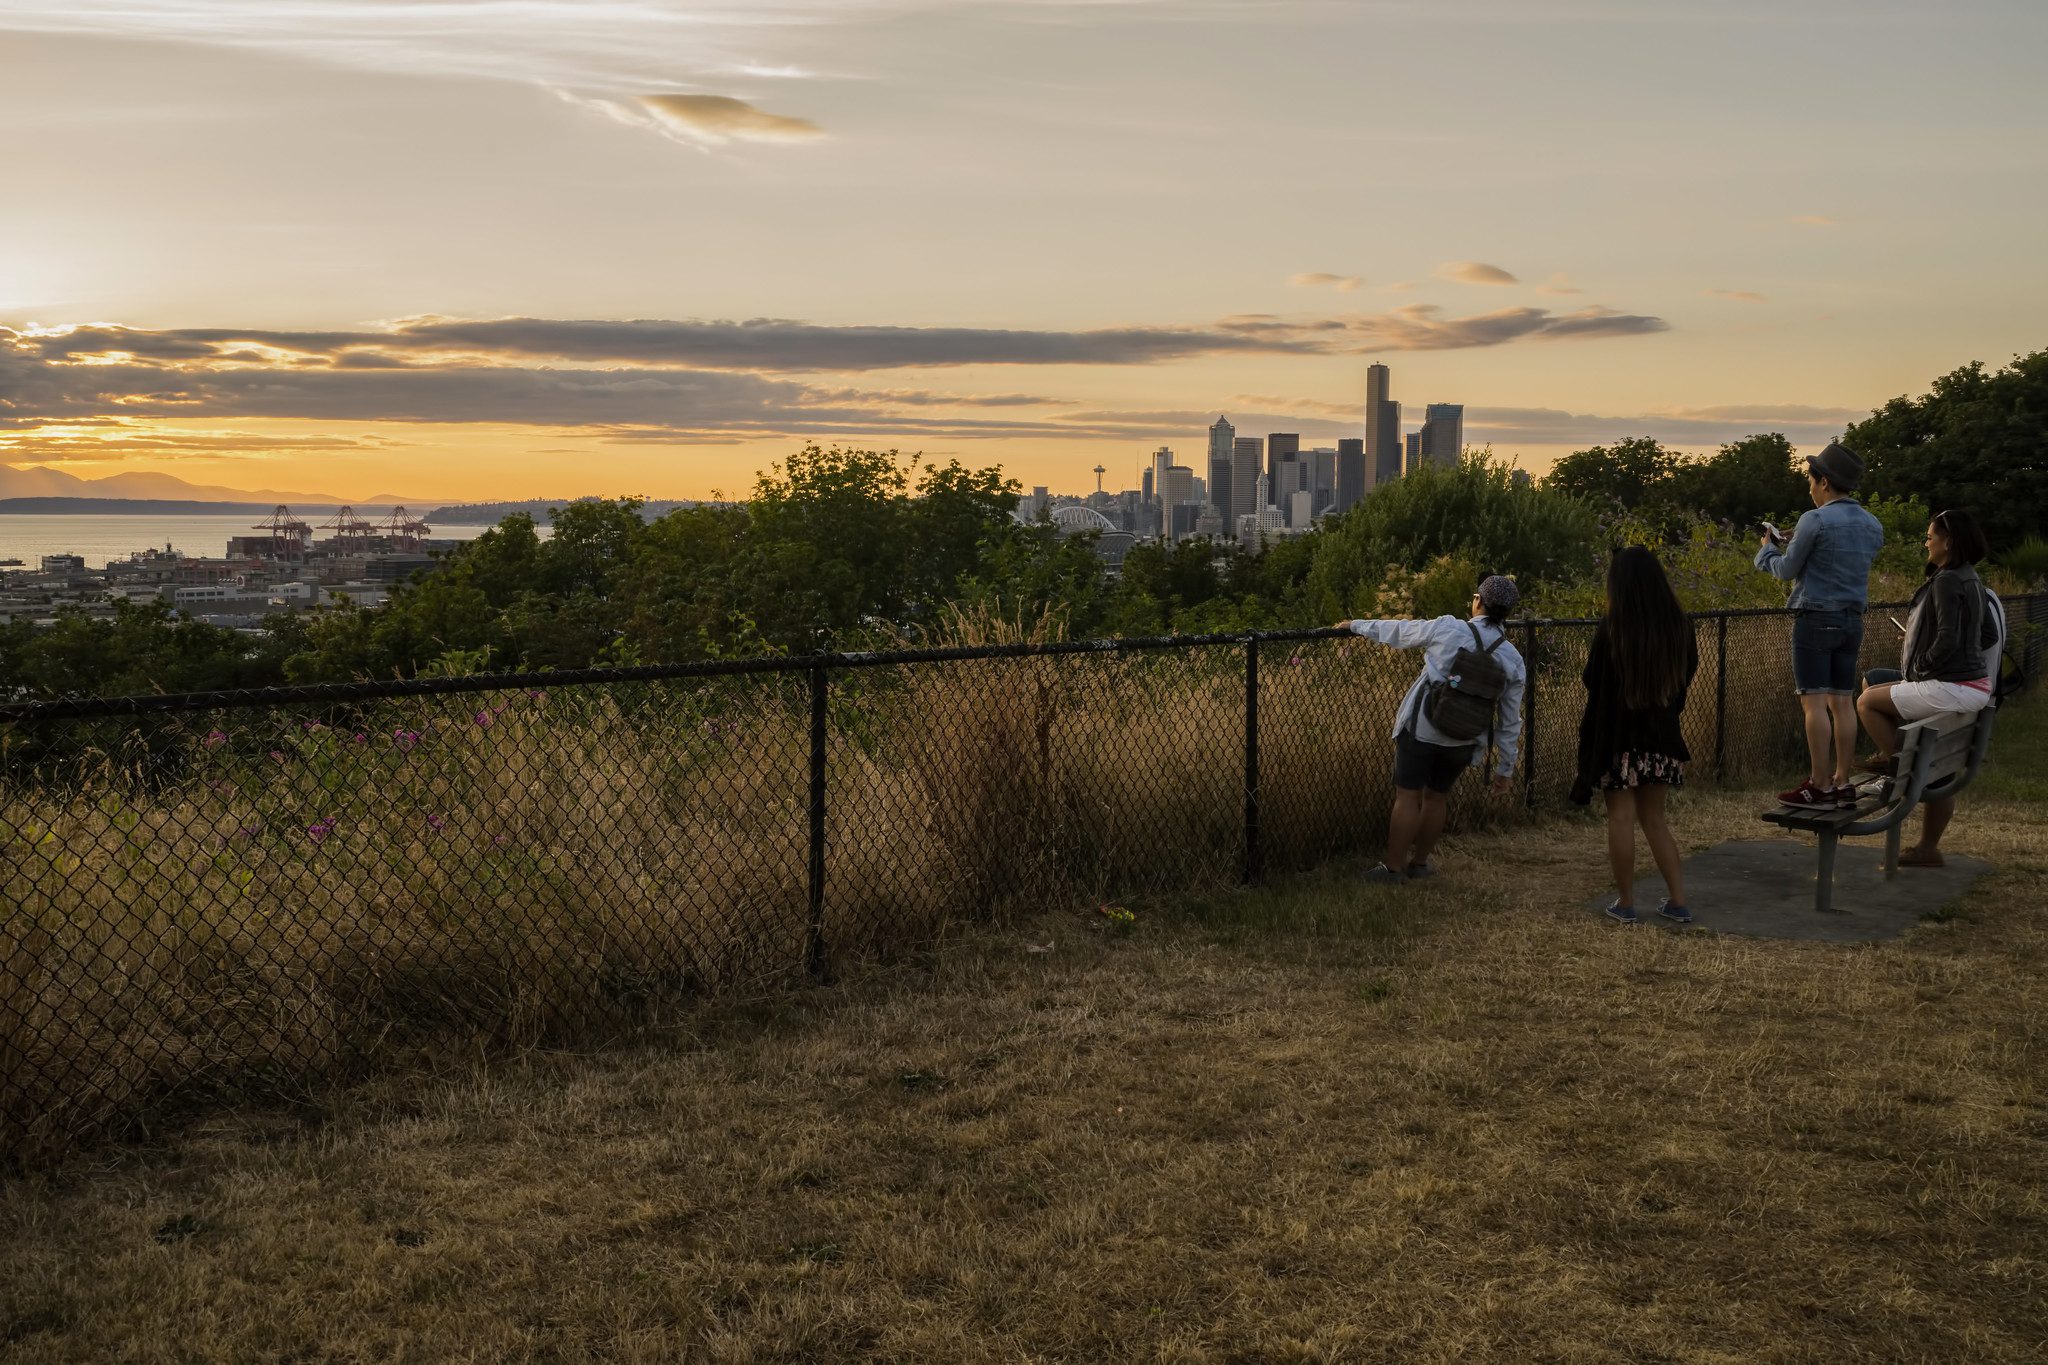 People gather at a viewpoint in Beacon Hill to view downtown Seattle in the late evening as the sun sets. Grass, a bench, and a black fence are in the foreground, with city views, clouds, and yellow-gray sky in the background.